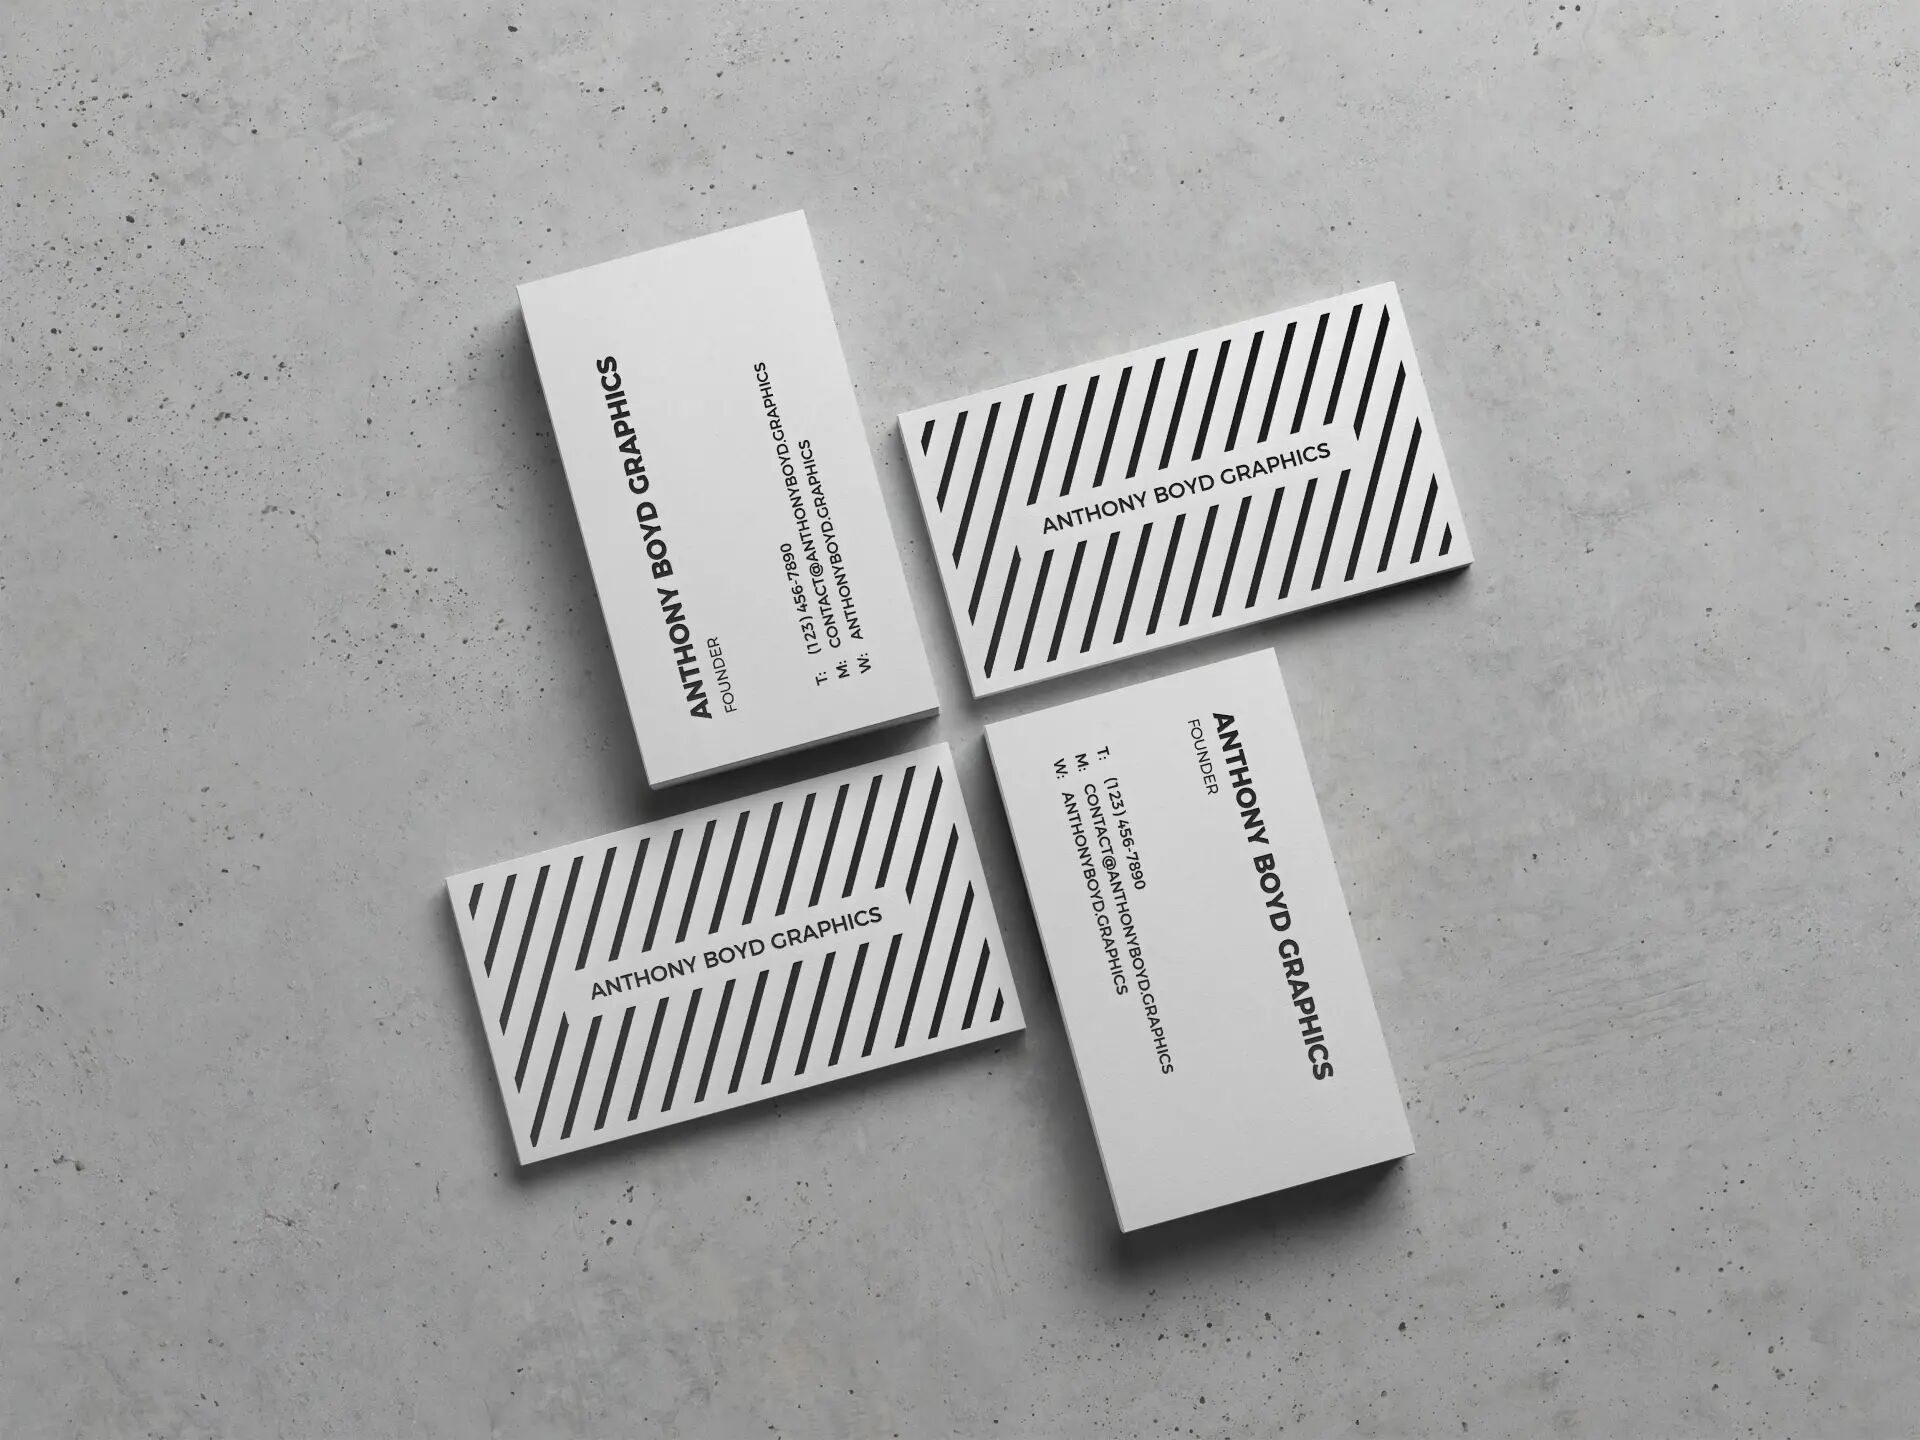 Four Modern Business Cards on Stone Texture Mockup FREE PSD